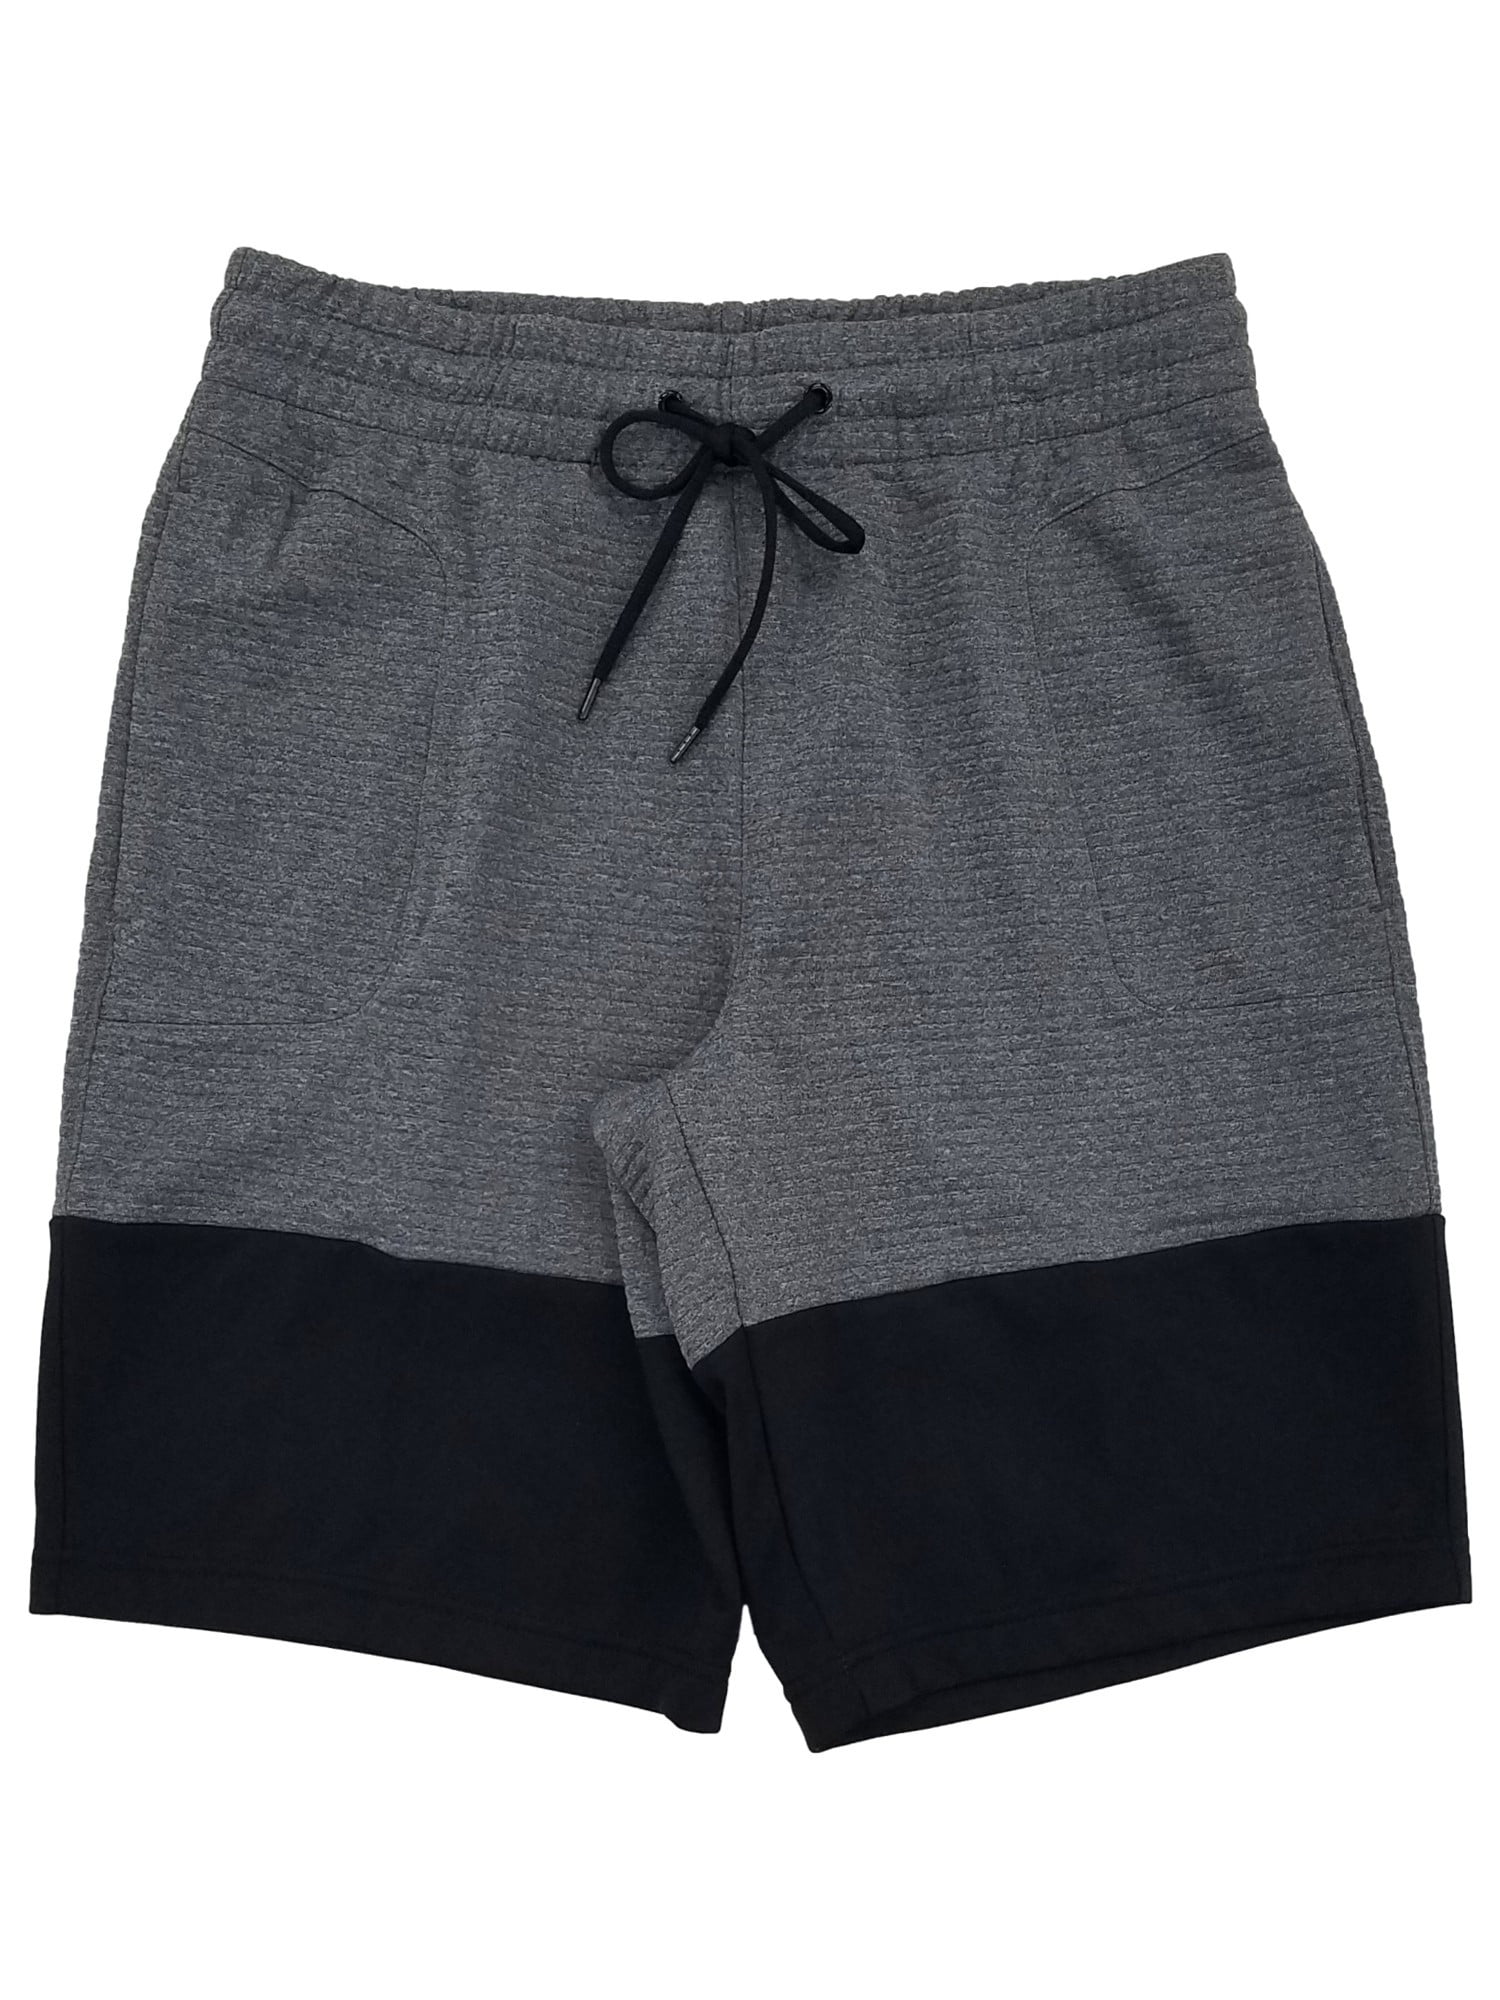 Details about   COMPANY 81  Boys Heather Gray Fleece Athletic Shorts NWT Retail $36.00 